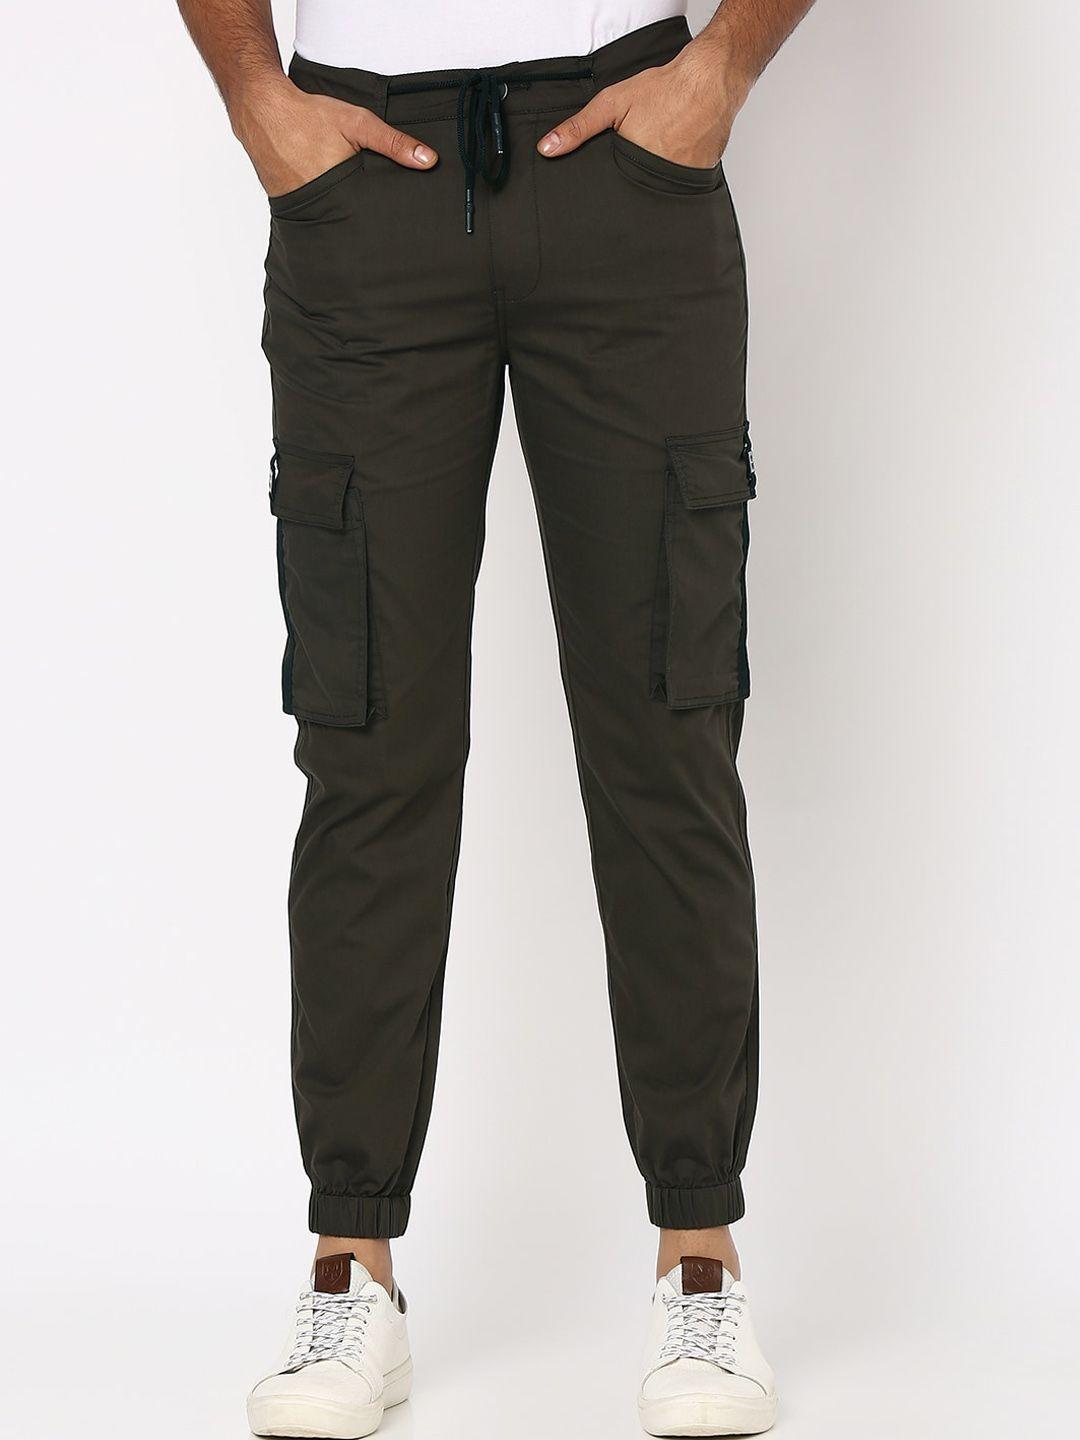 mufti-men-skinny-fit-mid-rise-cargo-trousers